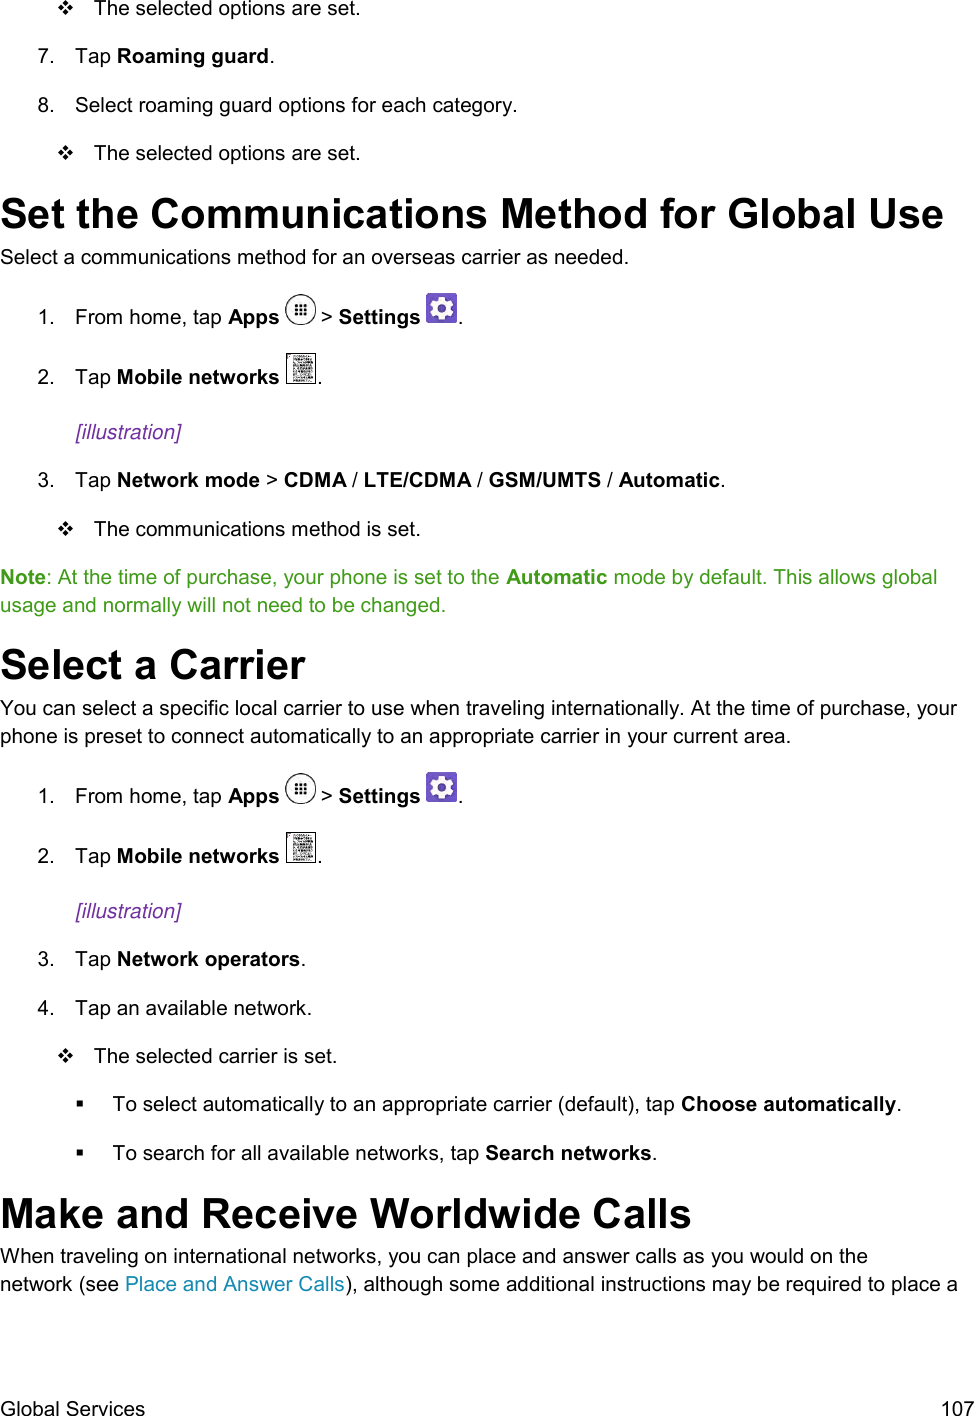  Global Services  107   The selected options are set. 7.  Tap Roaming guard.  8.  Select roaming guard options for each category.    The selected options are set. Set the Communications Method for Global Use Select a communications method for an overseas carrier as needed. 1.  From home, tap Apps   &gt; Settings  .  2.  Tap Mobile networks  .  [illustration]   3.  Tap Network mode &gt; CDMA / LTE/CDMA / GSM/UMTS / Automatic.    The communications method is set. Note: At the time of purchase, your phone is set to the Automatic mode by default. This allows global usage and normally will not need to be changed. Select a Carrier You can select a specific local carrier to use when traveling internationally. At the time of purchase, your phone is preset to connect automatically to an appropriate carrier in your current area. 1.  From home, tap Apps   &gt; Settings  .  2.  Tap Mobile networks  .  [illustration]   3.  Tap Network operators.  4.  Tap an available network.   The selected carrier is set.   To select automatically to an appropriate carrier (default), tap Choose automatically.   To search for all available networks, tap Search networks. Make and Receive Worldwide Calls  When traveling on international networks, you can place and answer calls as you would on the   network (see Place and Answer Calls), although some additional instructions may be required to place a 